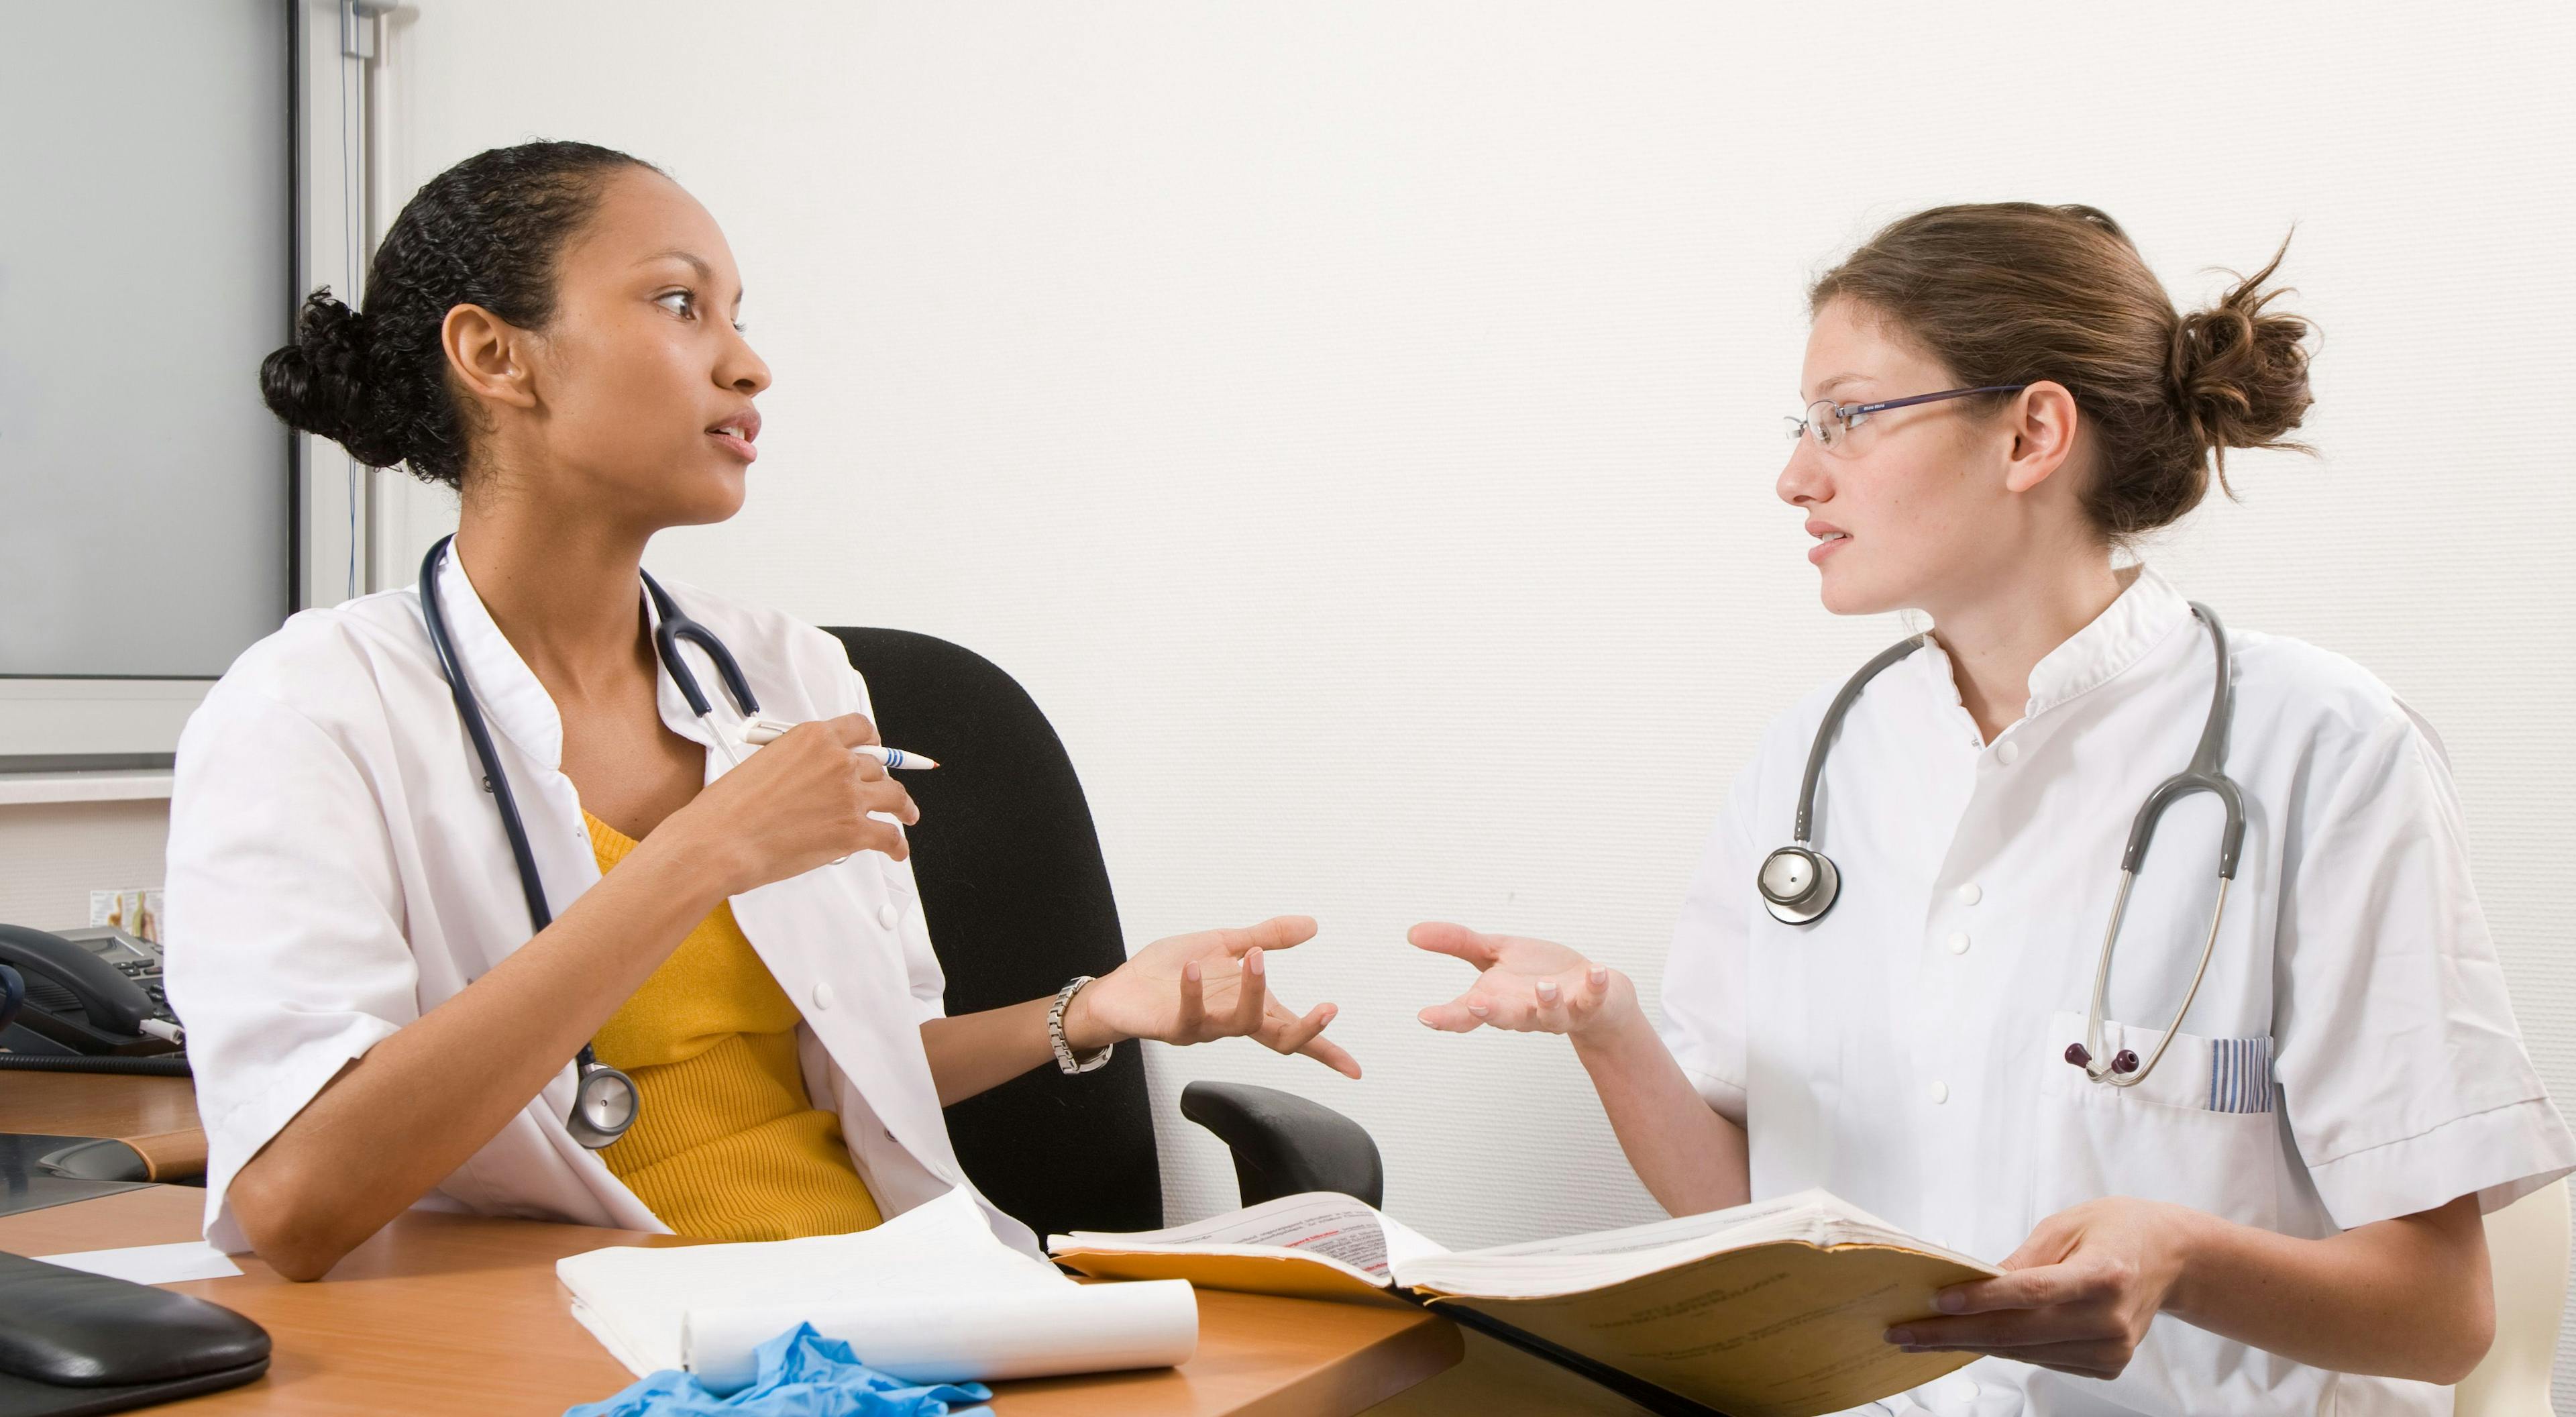 Strategies for Nurses to Handle Workplace Incivility